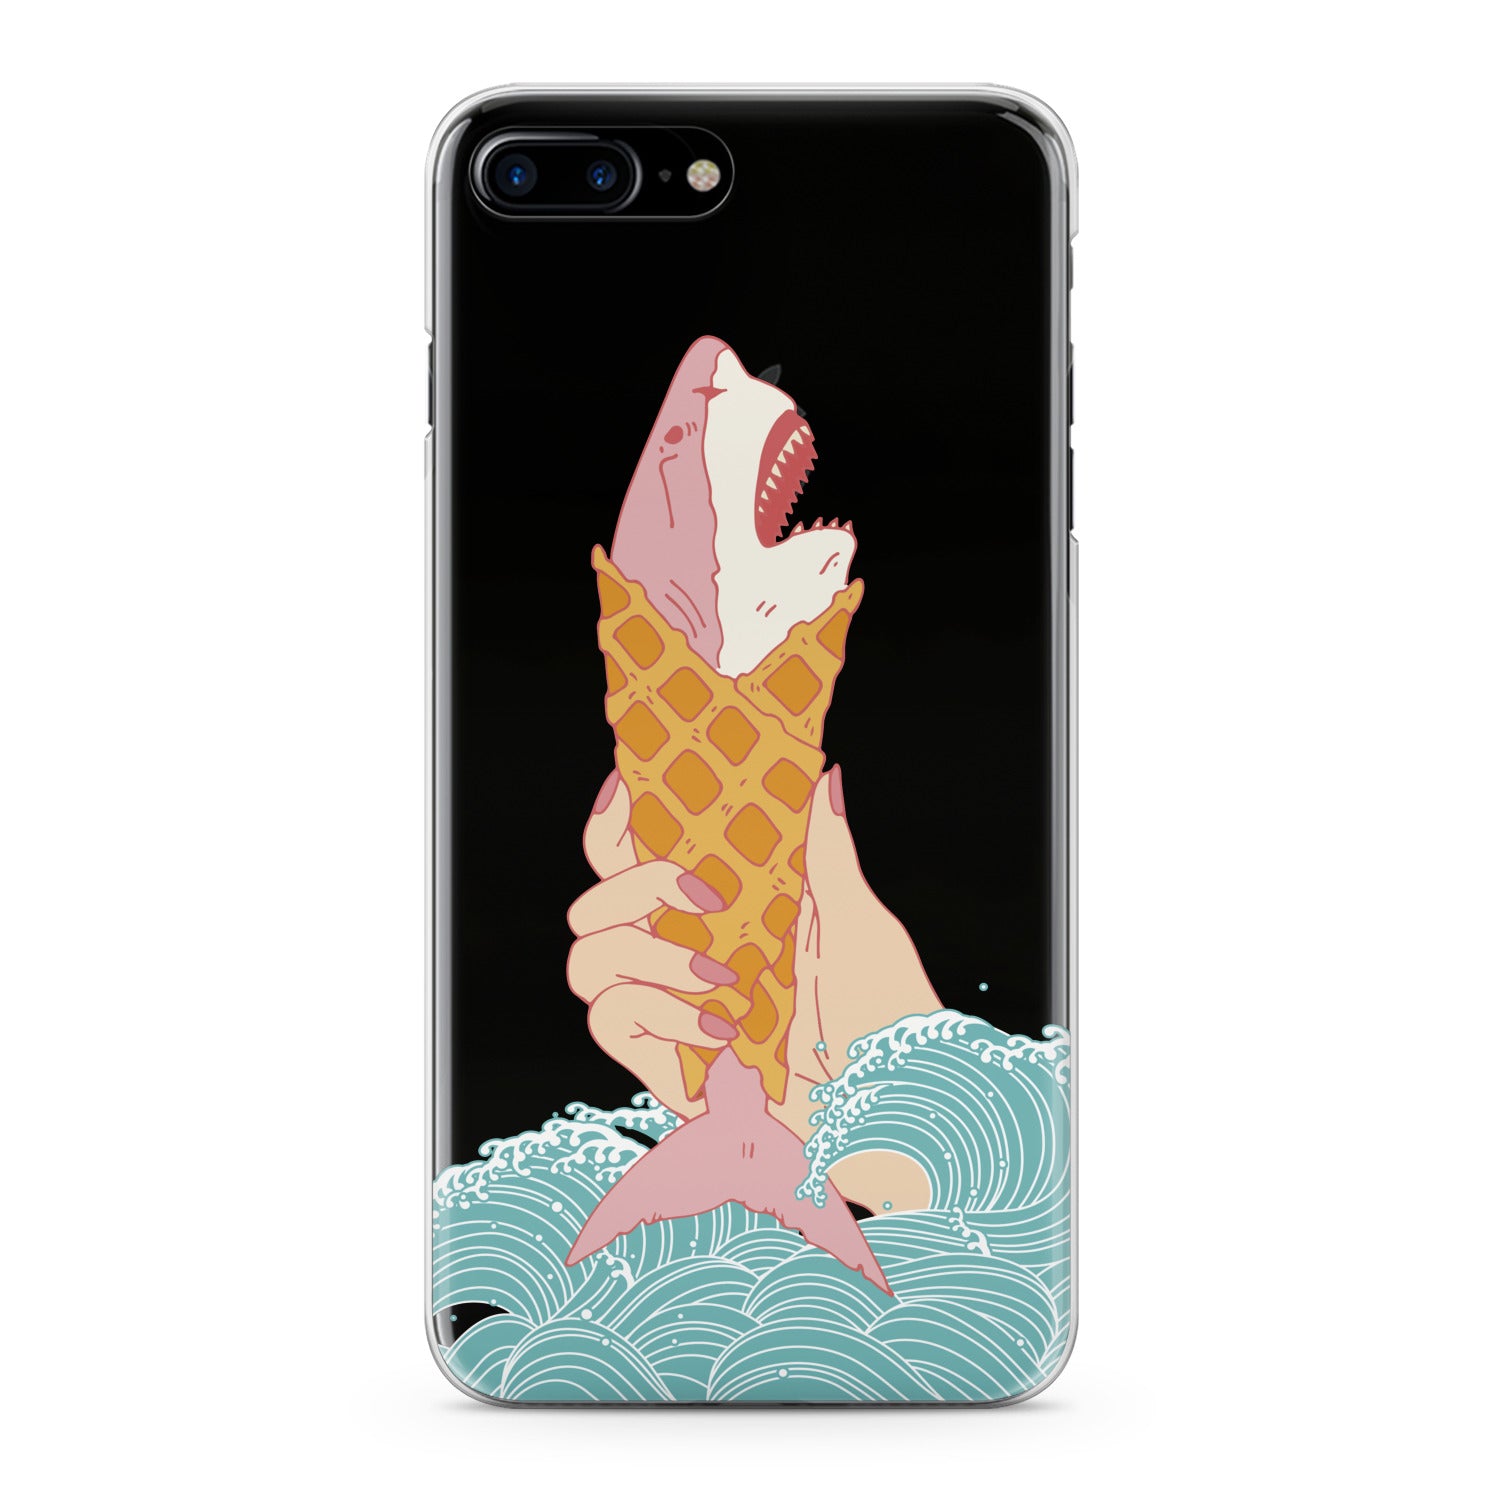 Lex Altern Shark Ice Cream Phone Case for your iPhone & Android phone.